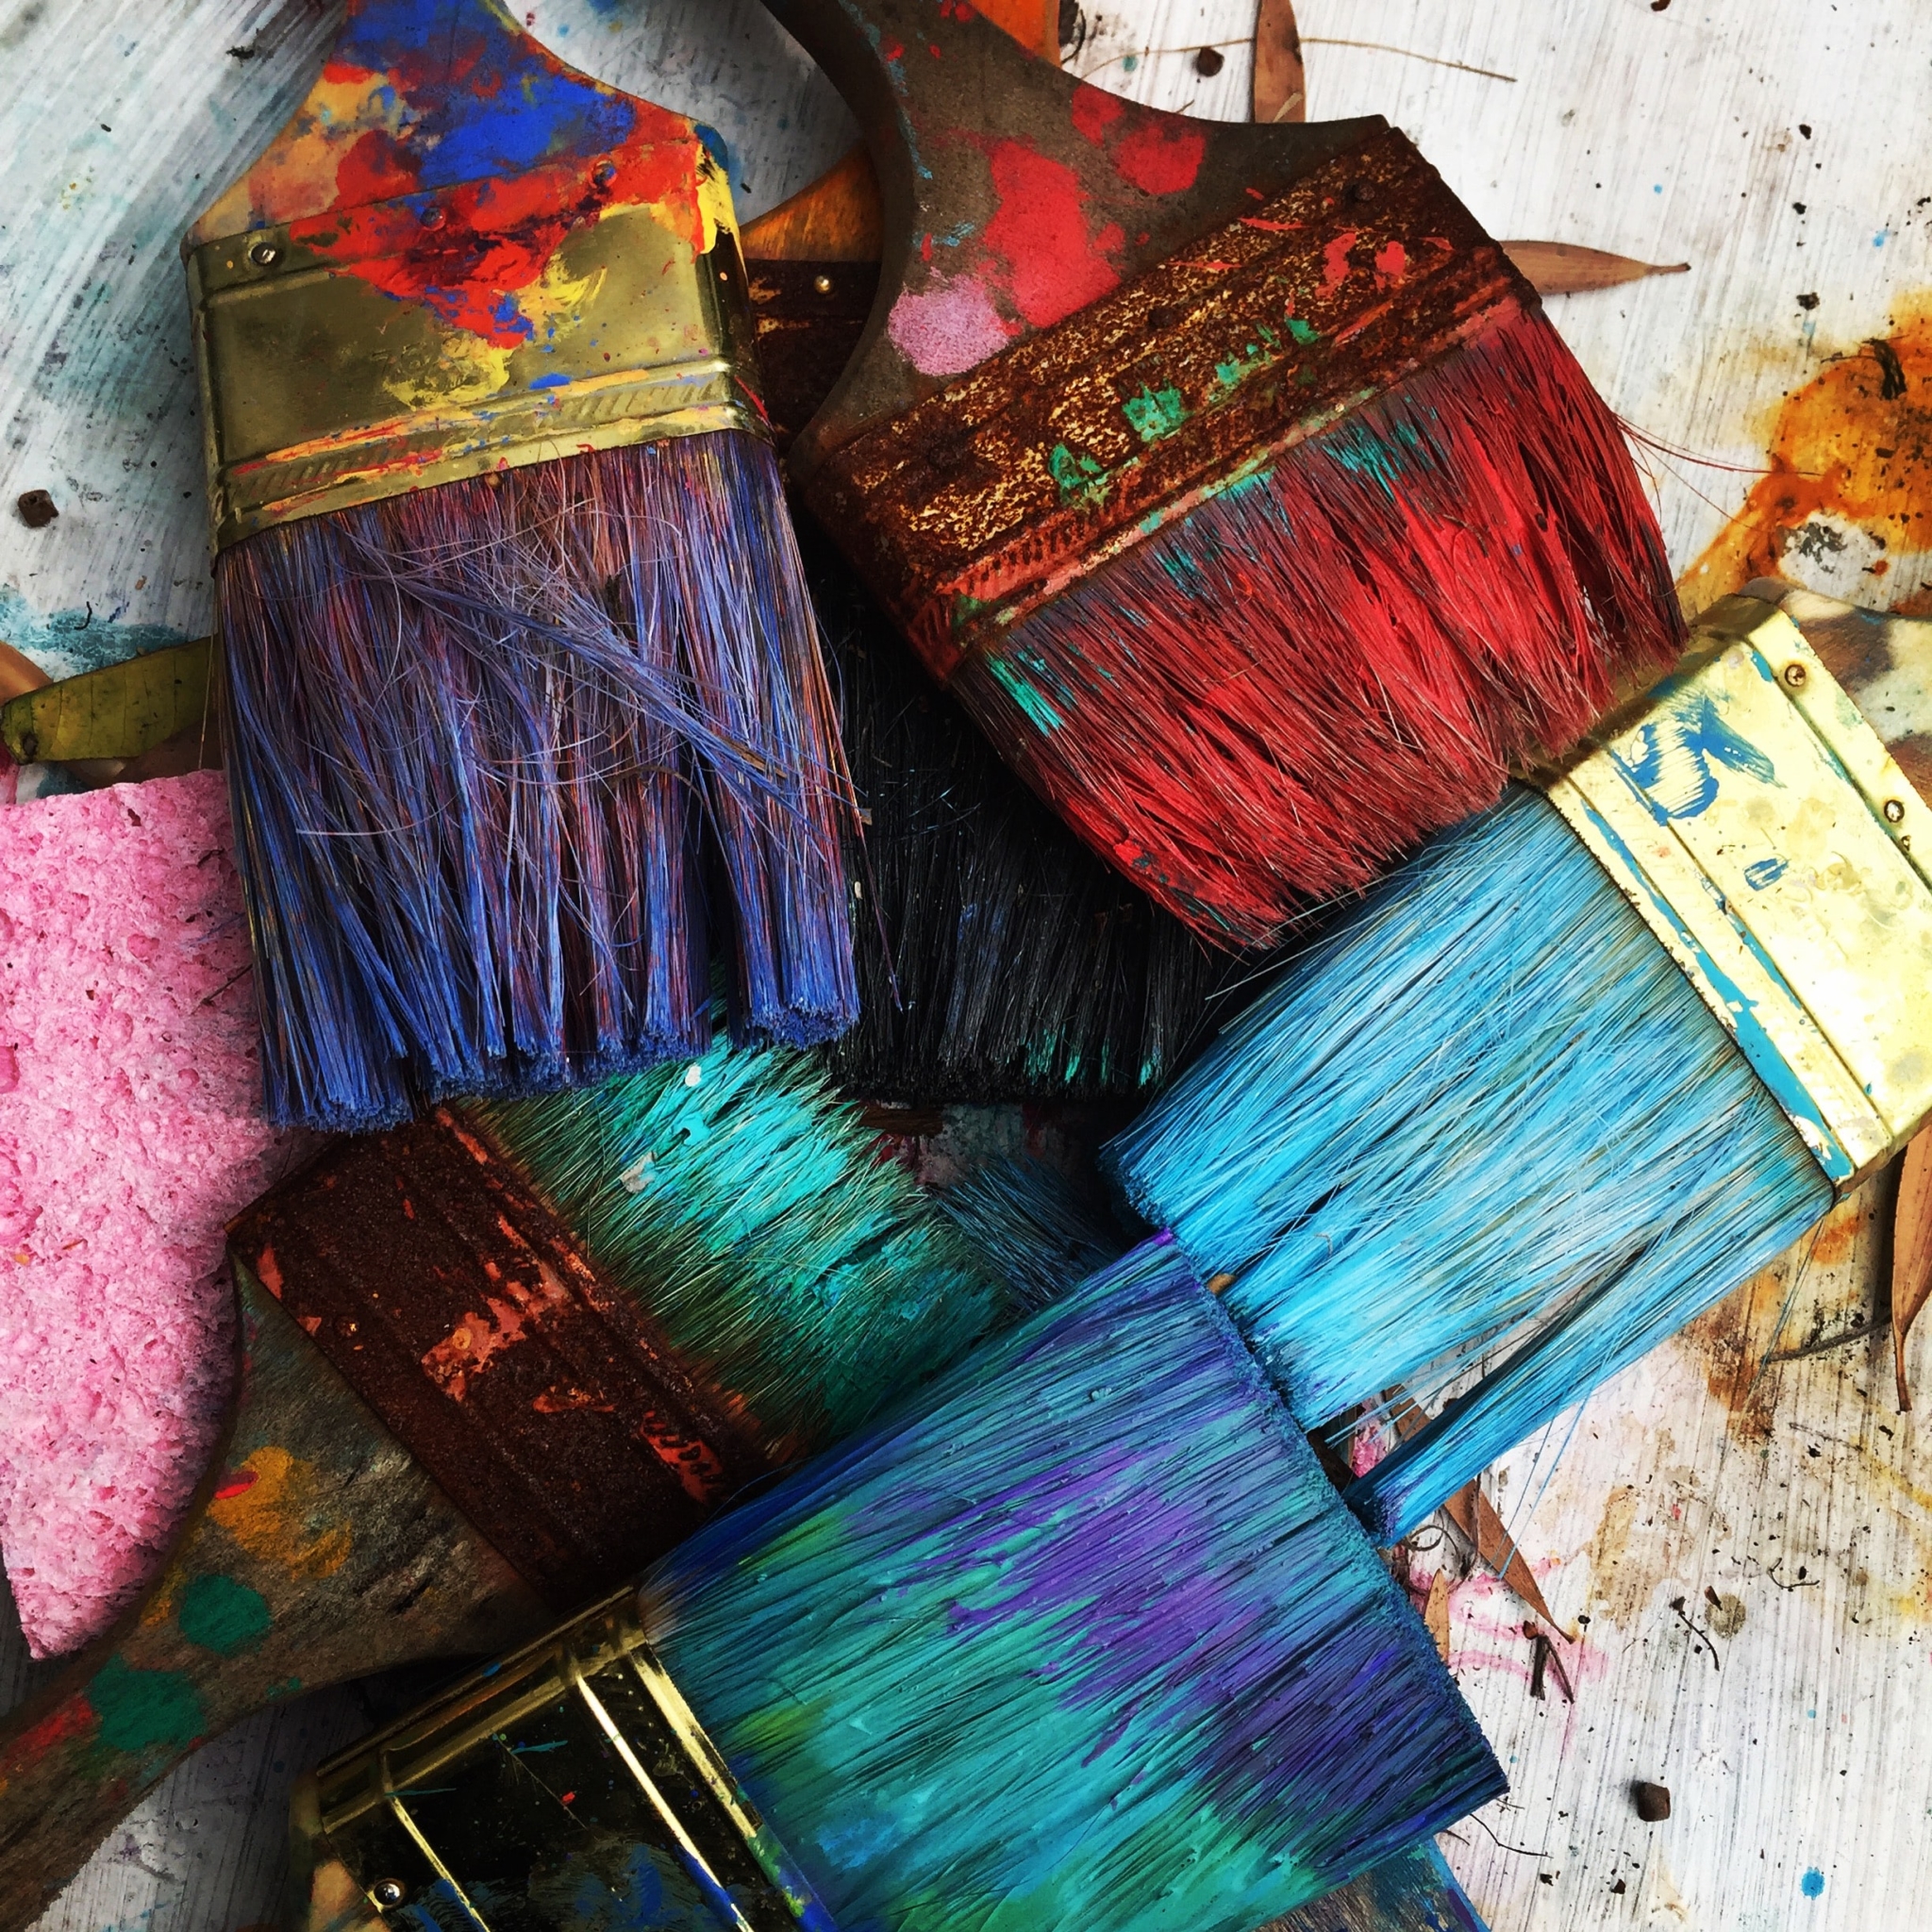 Broad paint brushes with various colors on them.